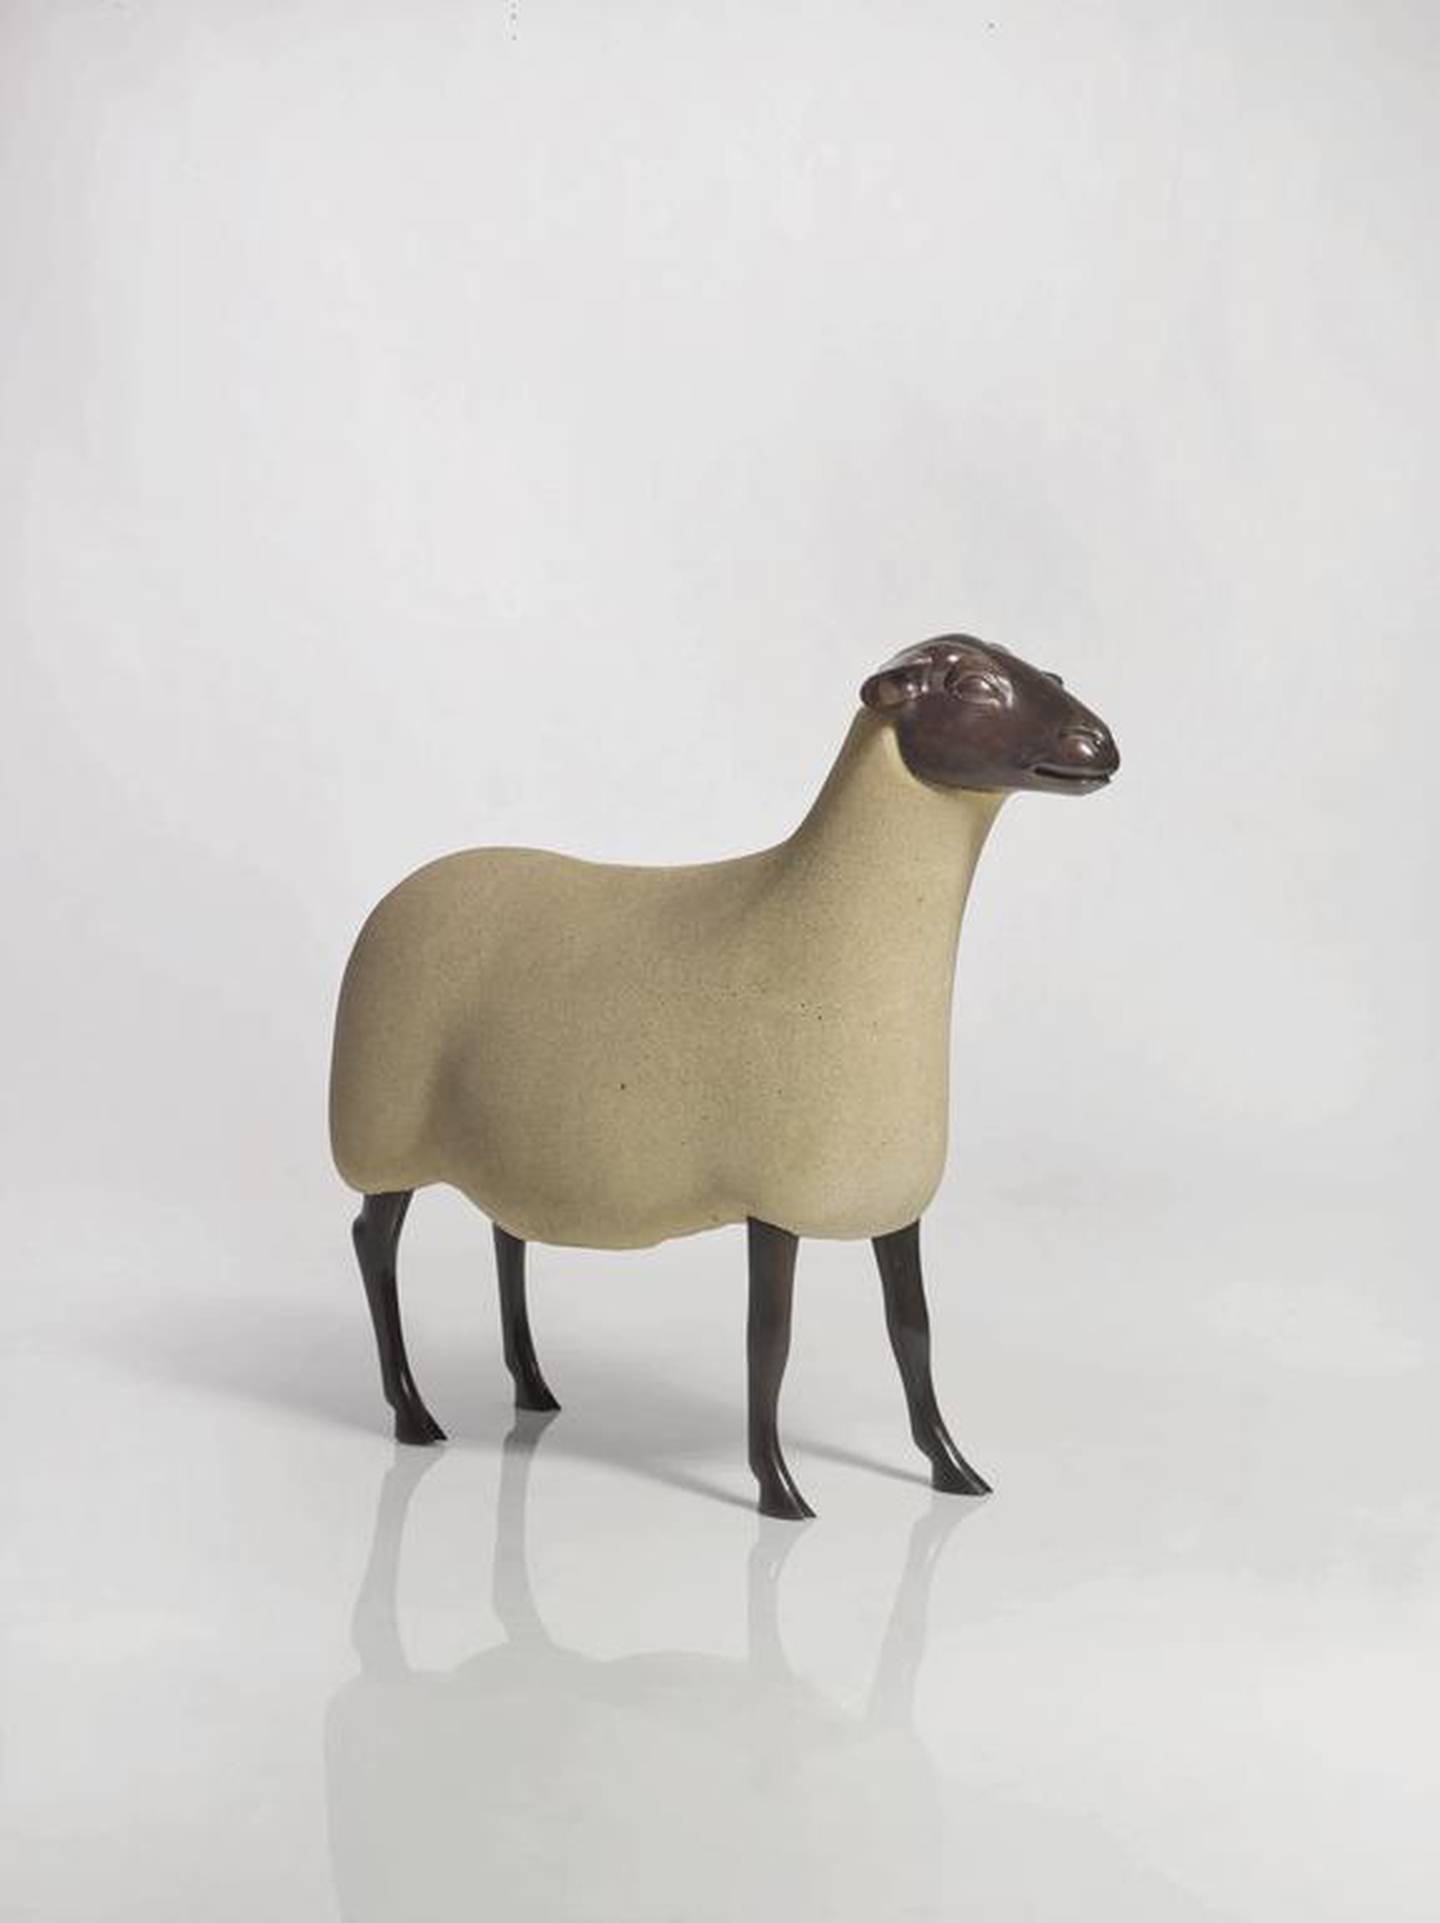 A sheep sculpture by French sculptor and installation artist, Francois-Xavier Lalanne. Courtesy of Sotheby’s